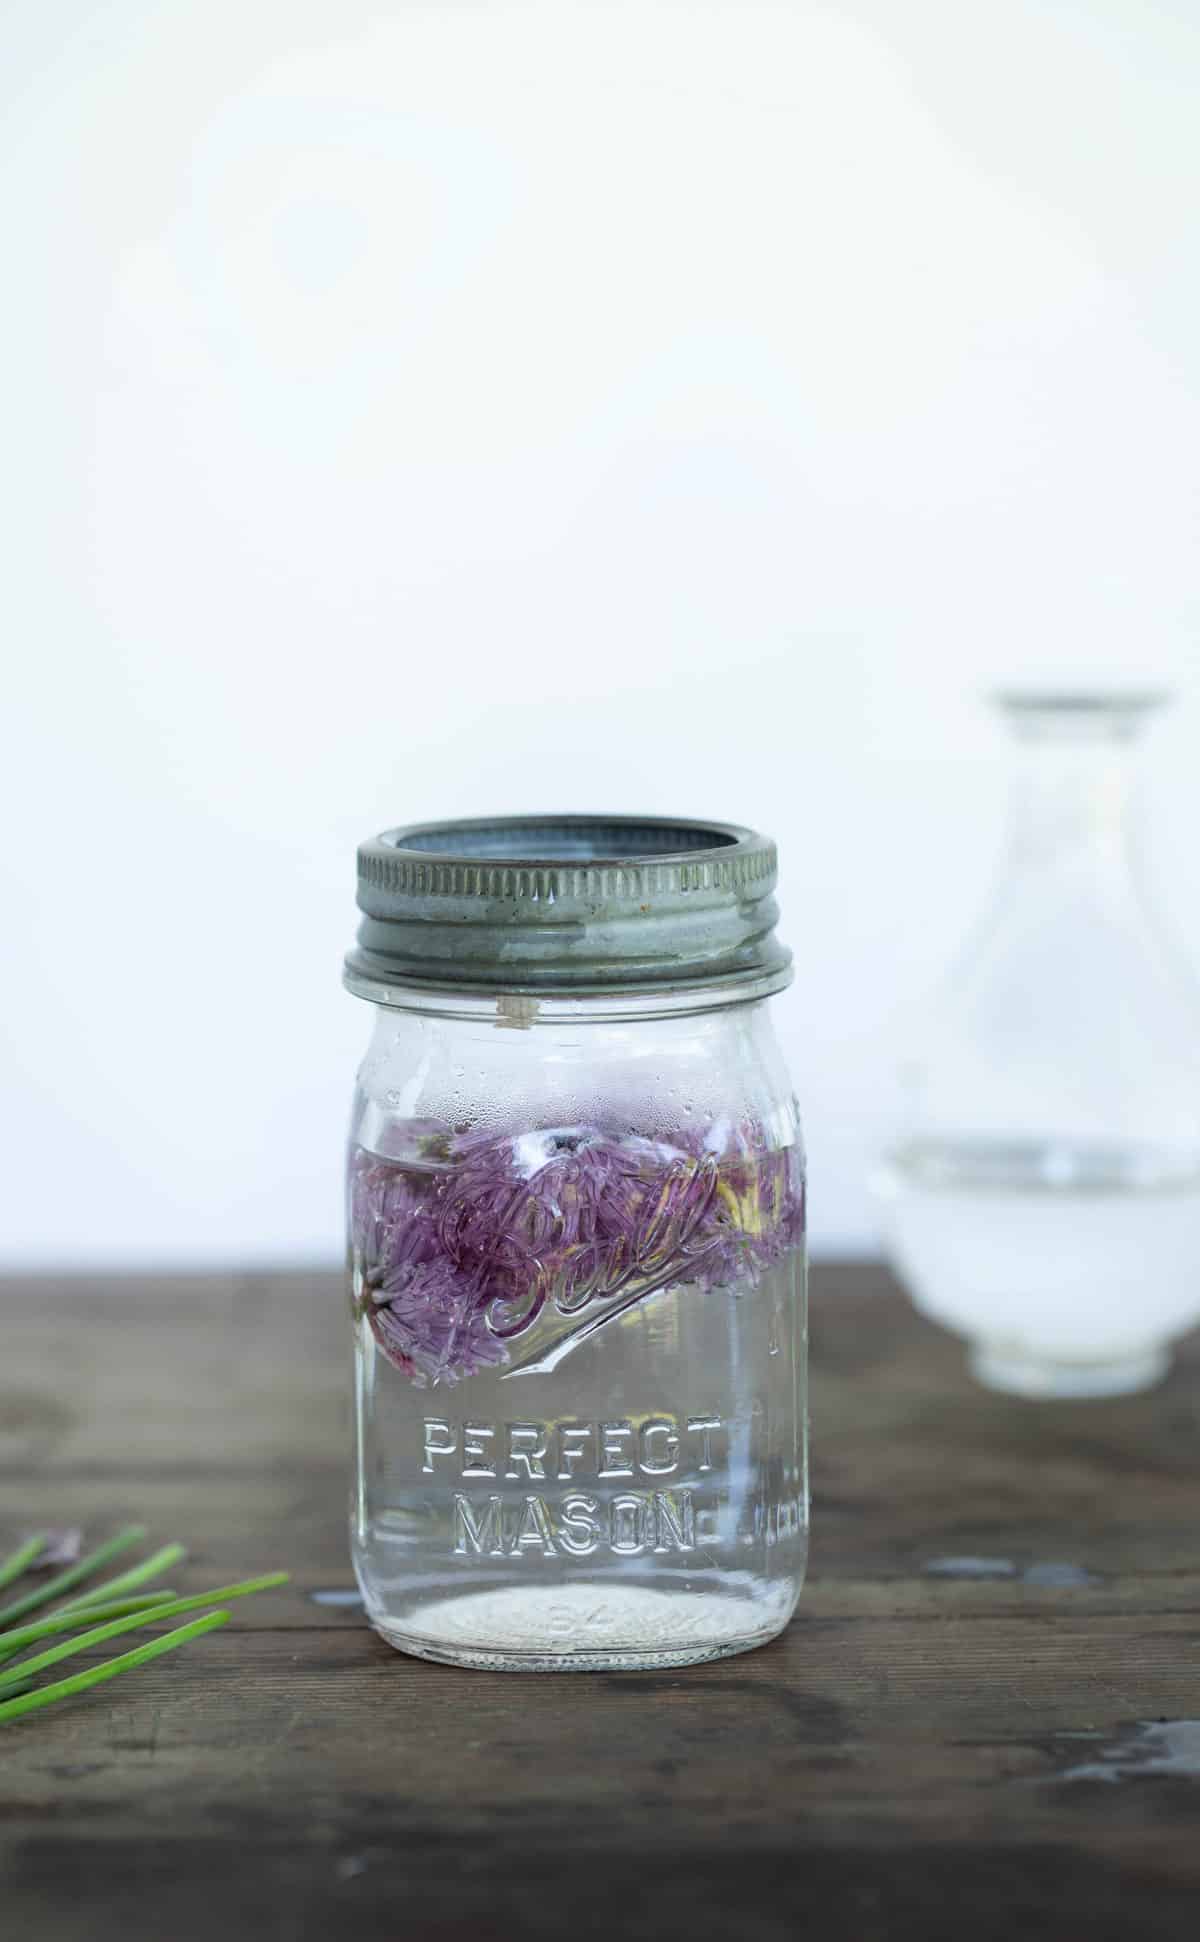 Chive Blossom Vinegar is a beautiful, naturally pink vinegar made from infusing the edible flowers abundantly growing atop chives in the spring with vinegar. chive blossom recipes | chive blossom vinegar | edible flowers | edible flower recipes | infused vinegar | herb infused vinegar | naturally pink foods | purple foods